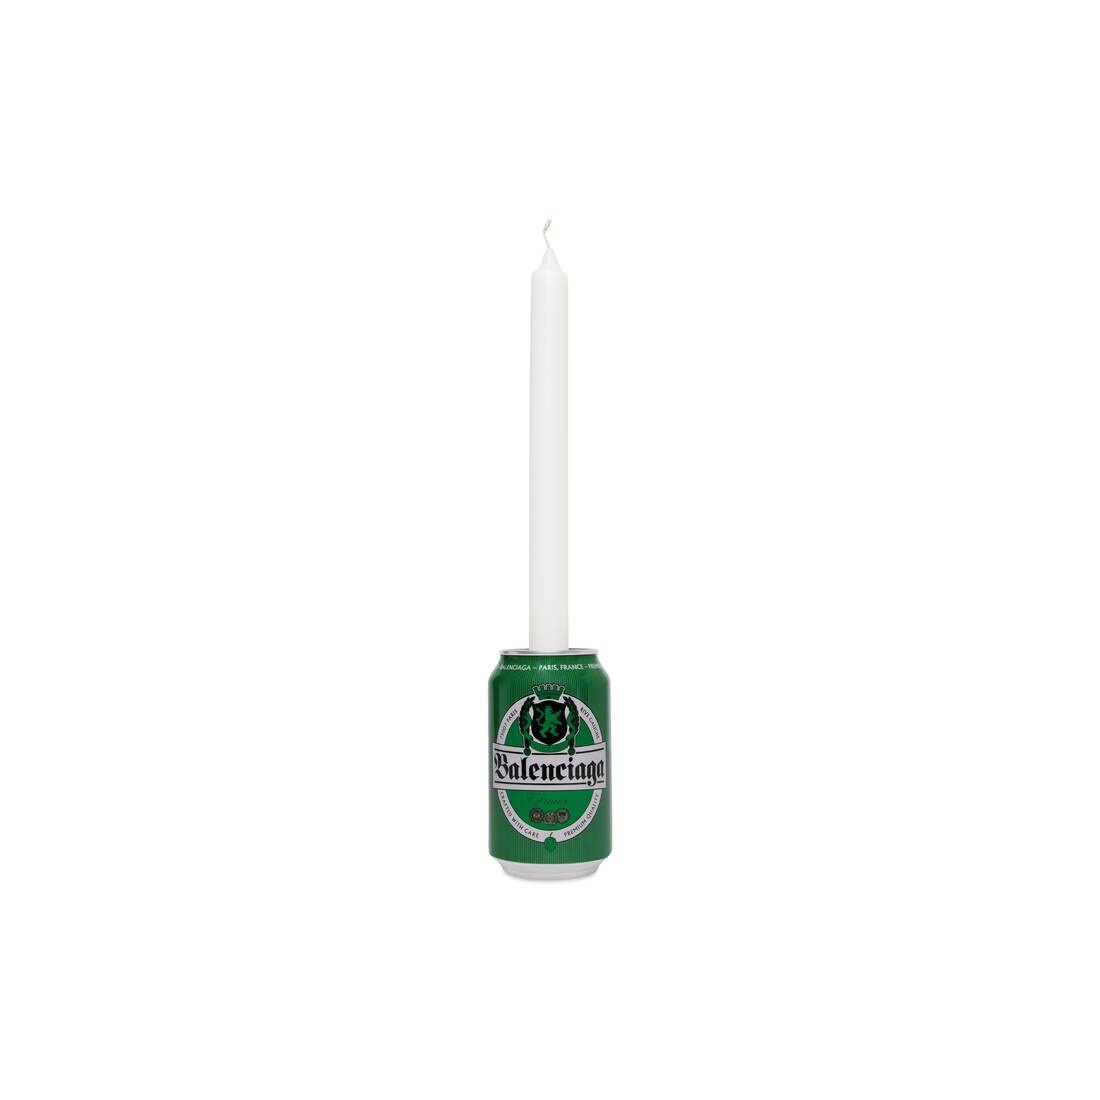 Drink Candle Holder in Green - 1